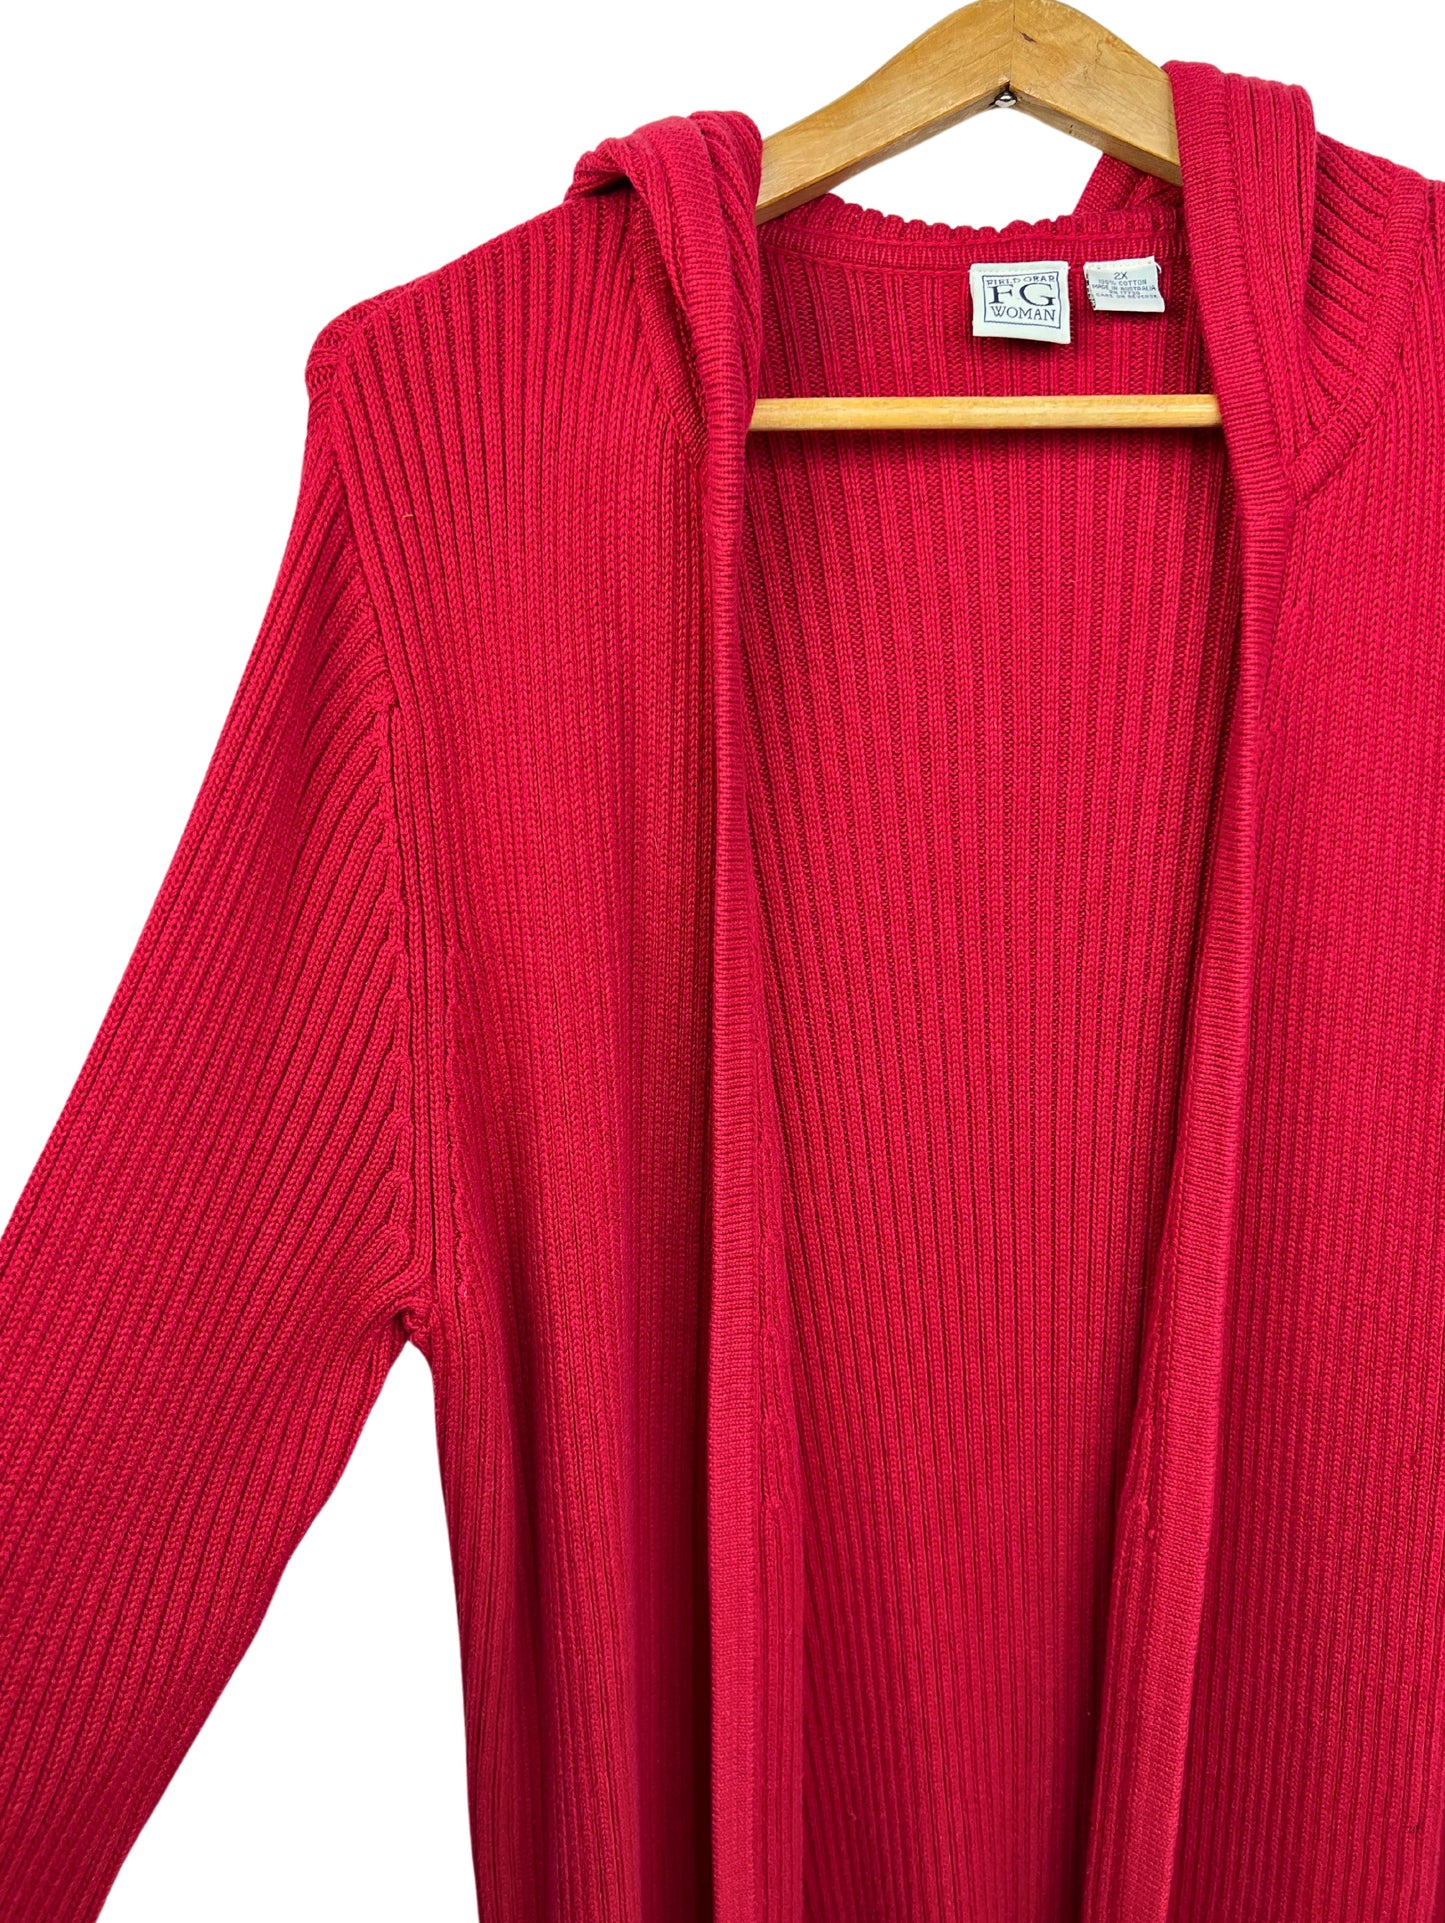 90’s Red Chunky Knit Hooded Open Front Cardigan Sweater Size 2X